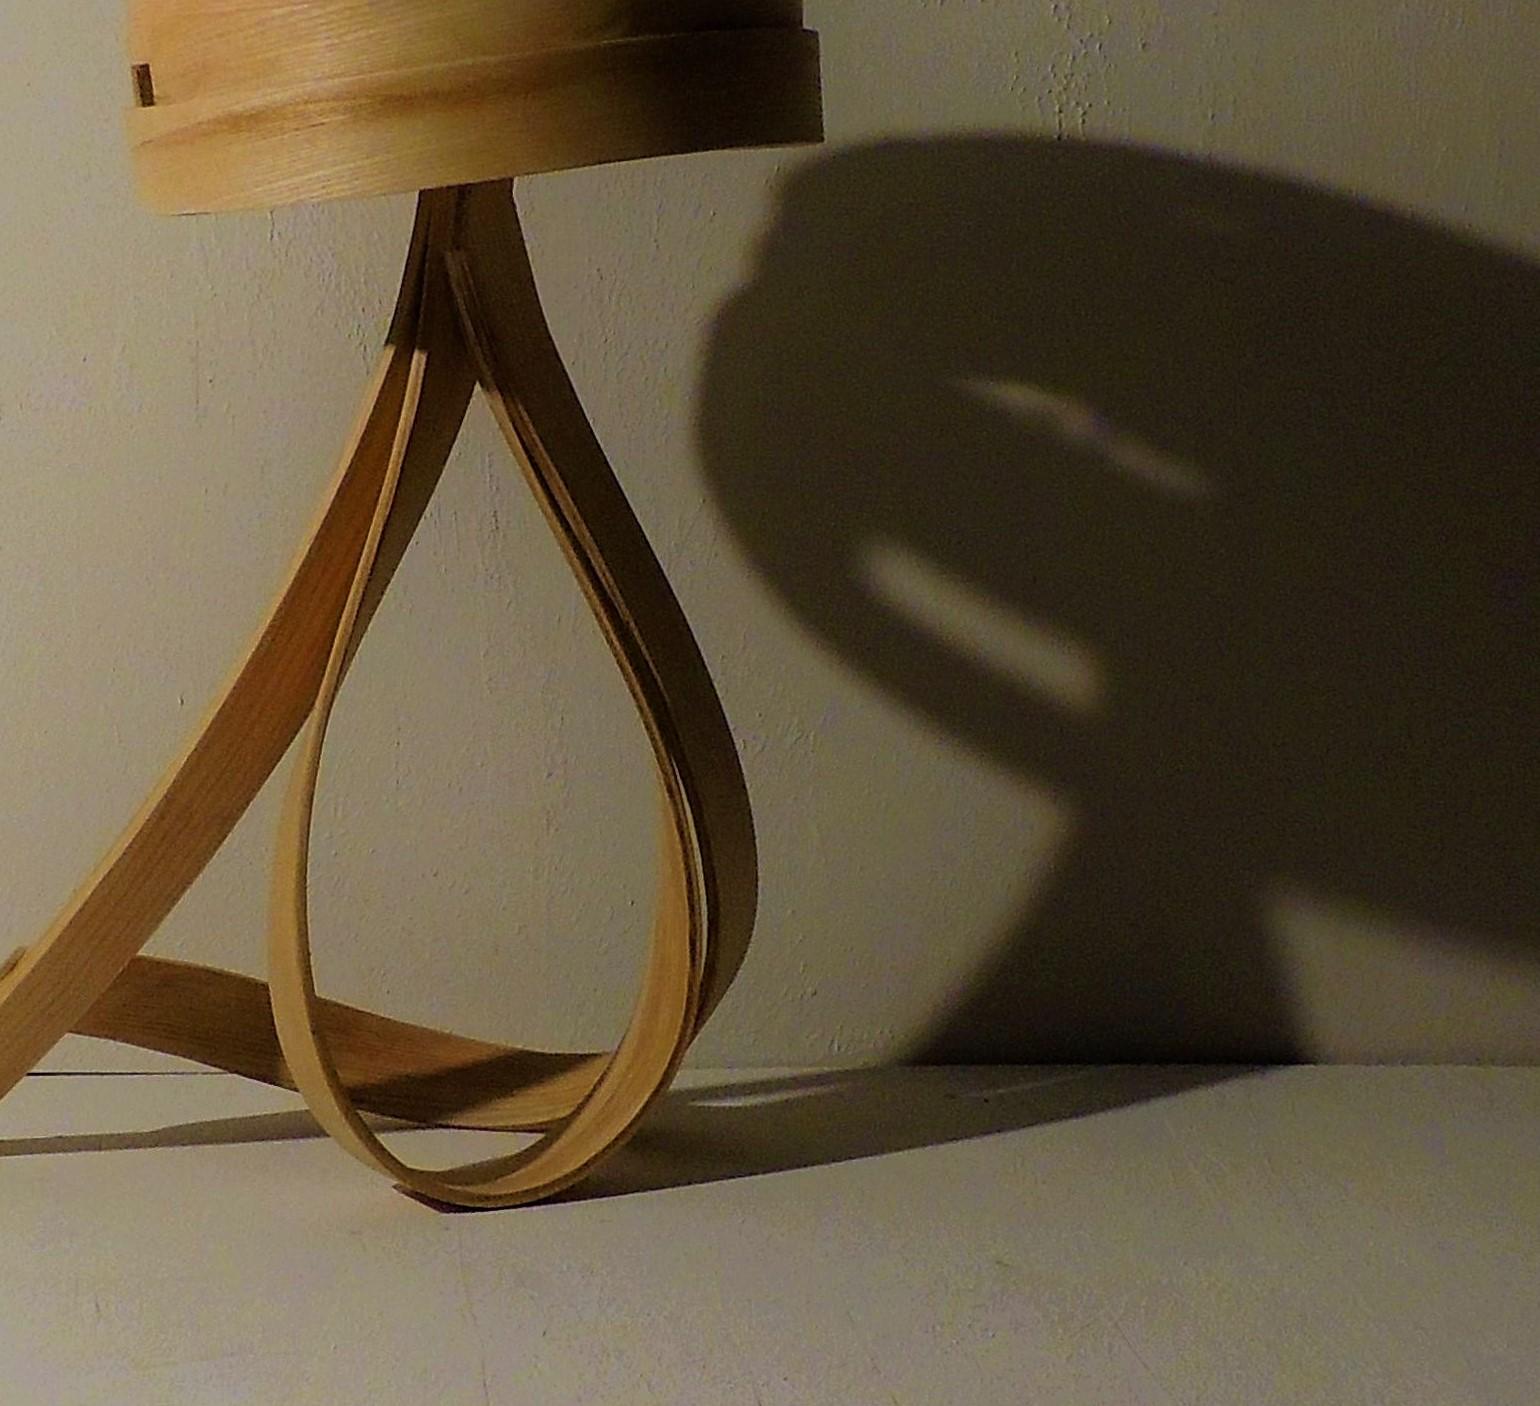 Hand-Crafted Minimal Bentwood Small Table Lamp in a Lacquered Finish by Raka Studio For Sale